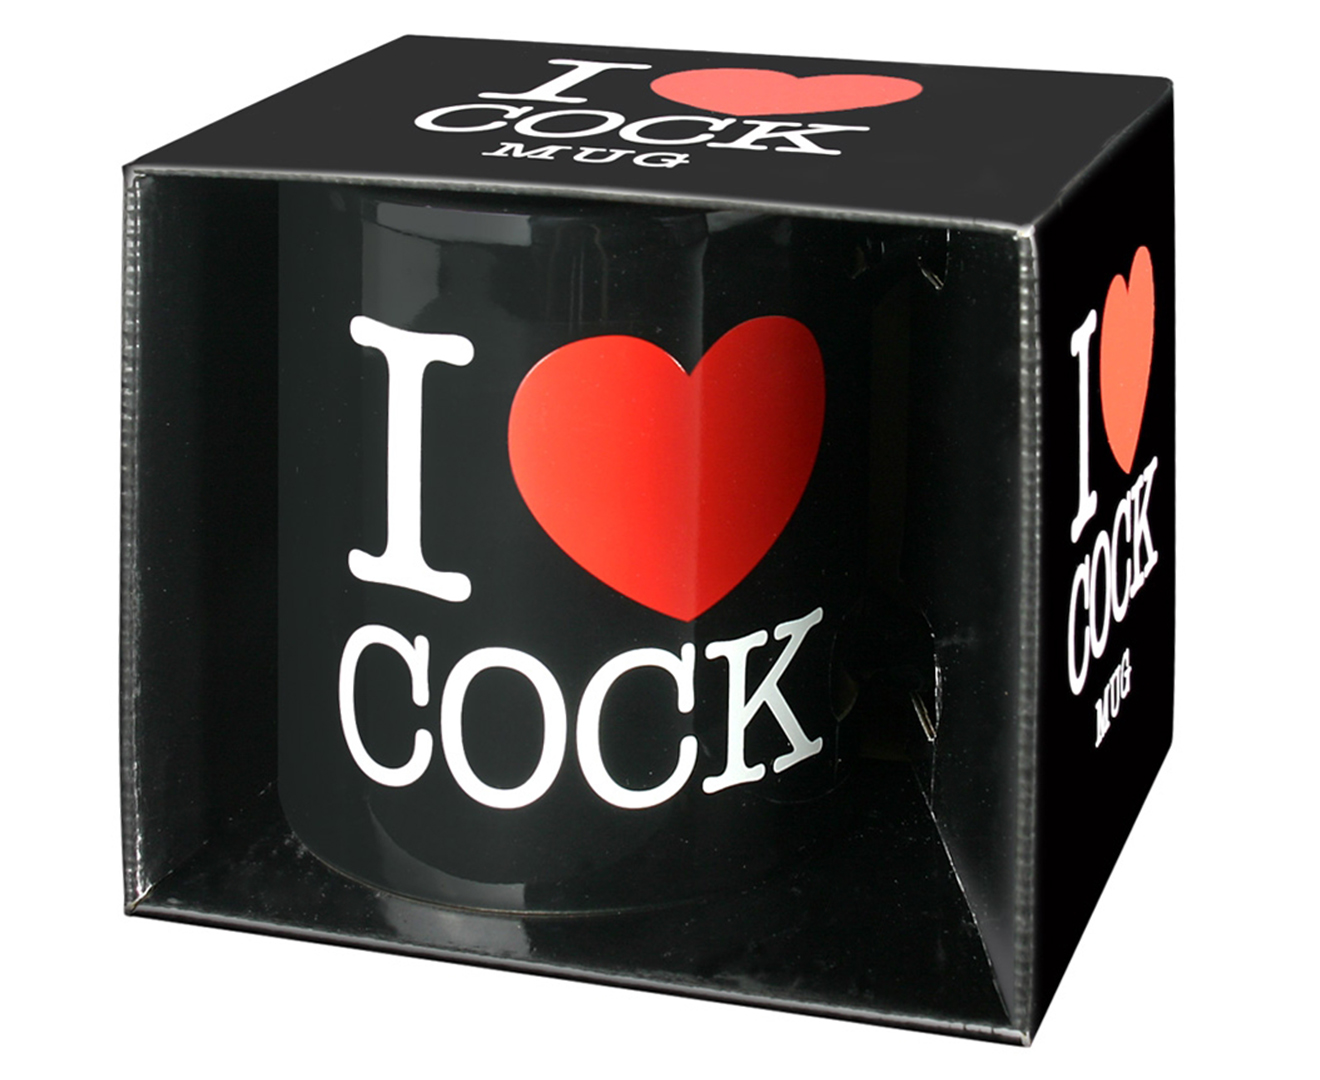 Love your cock images